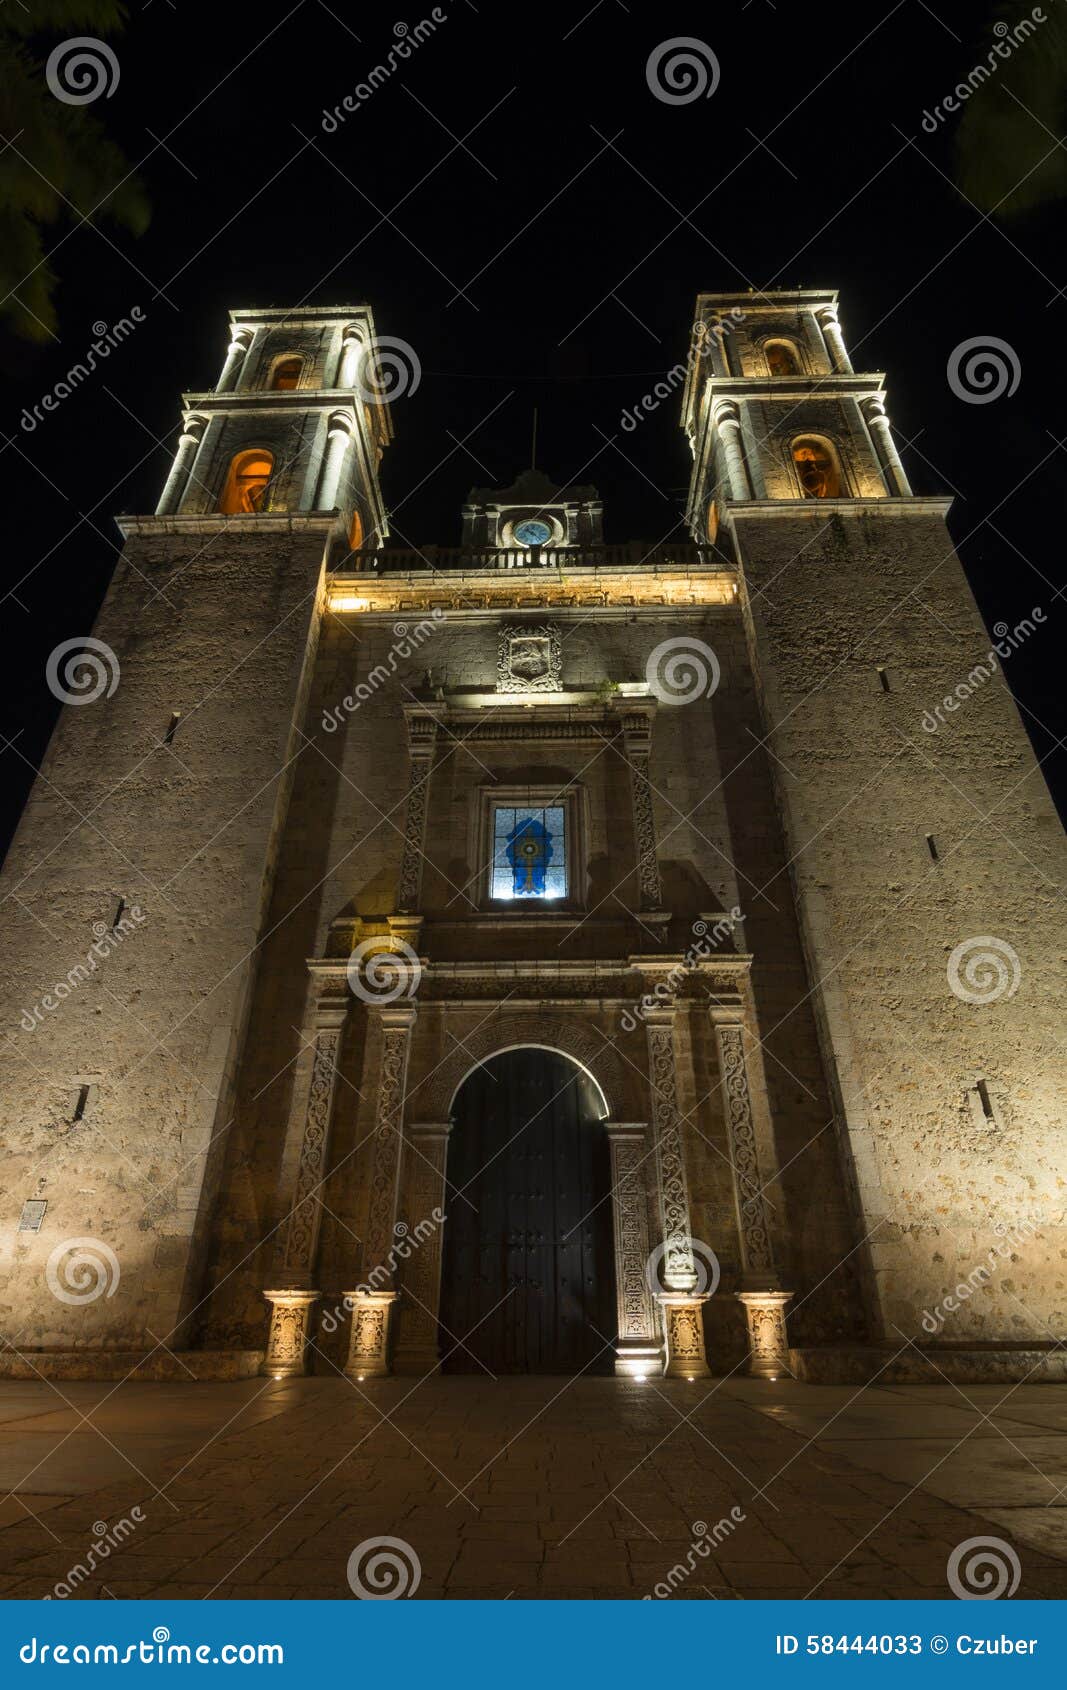 valladolid cathedral at night